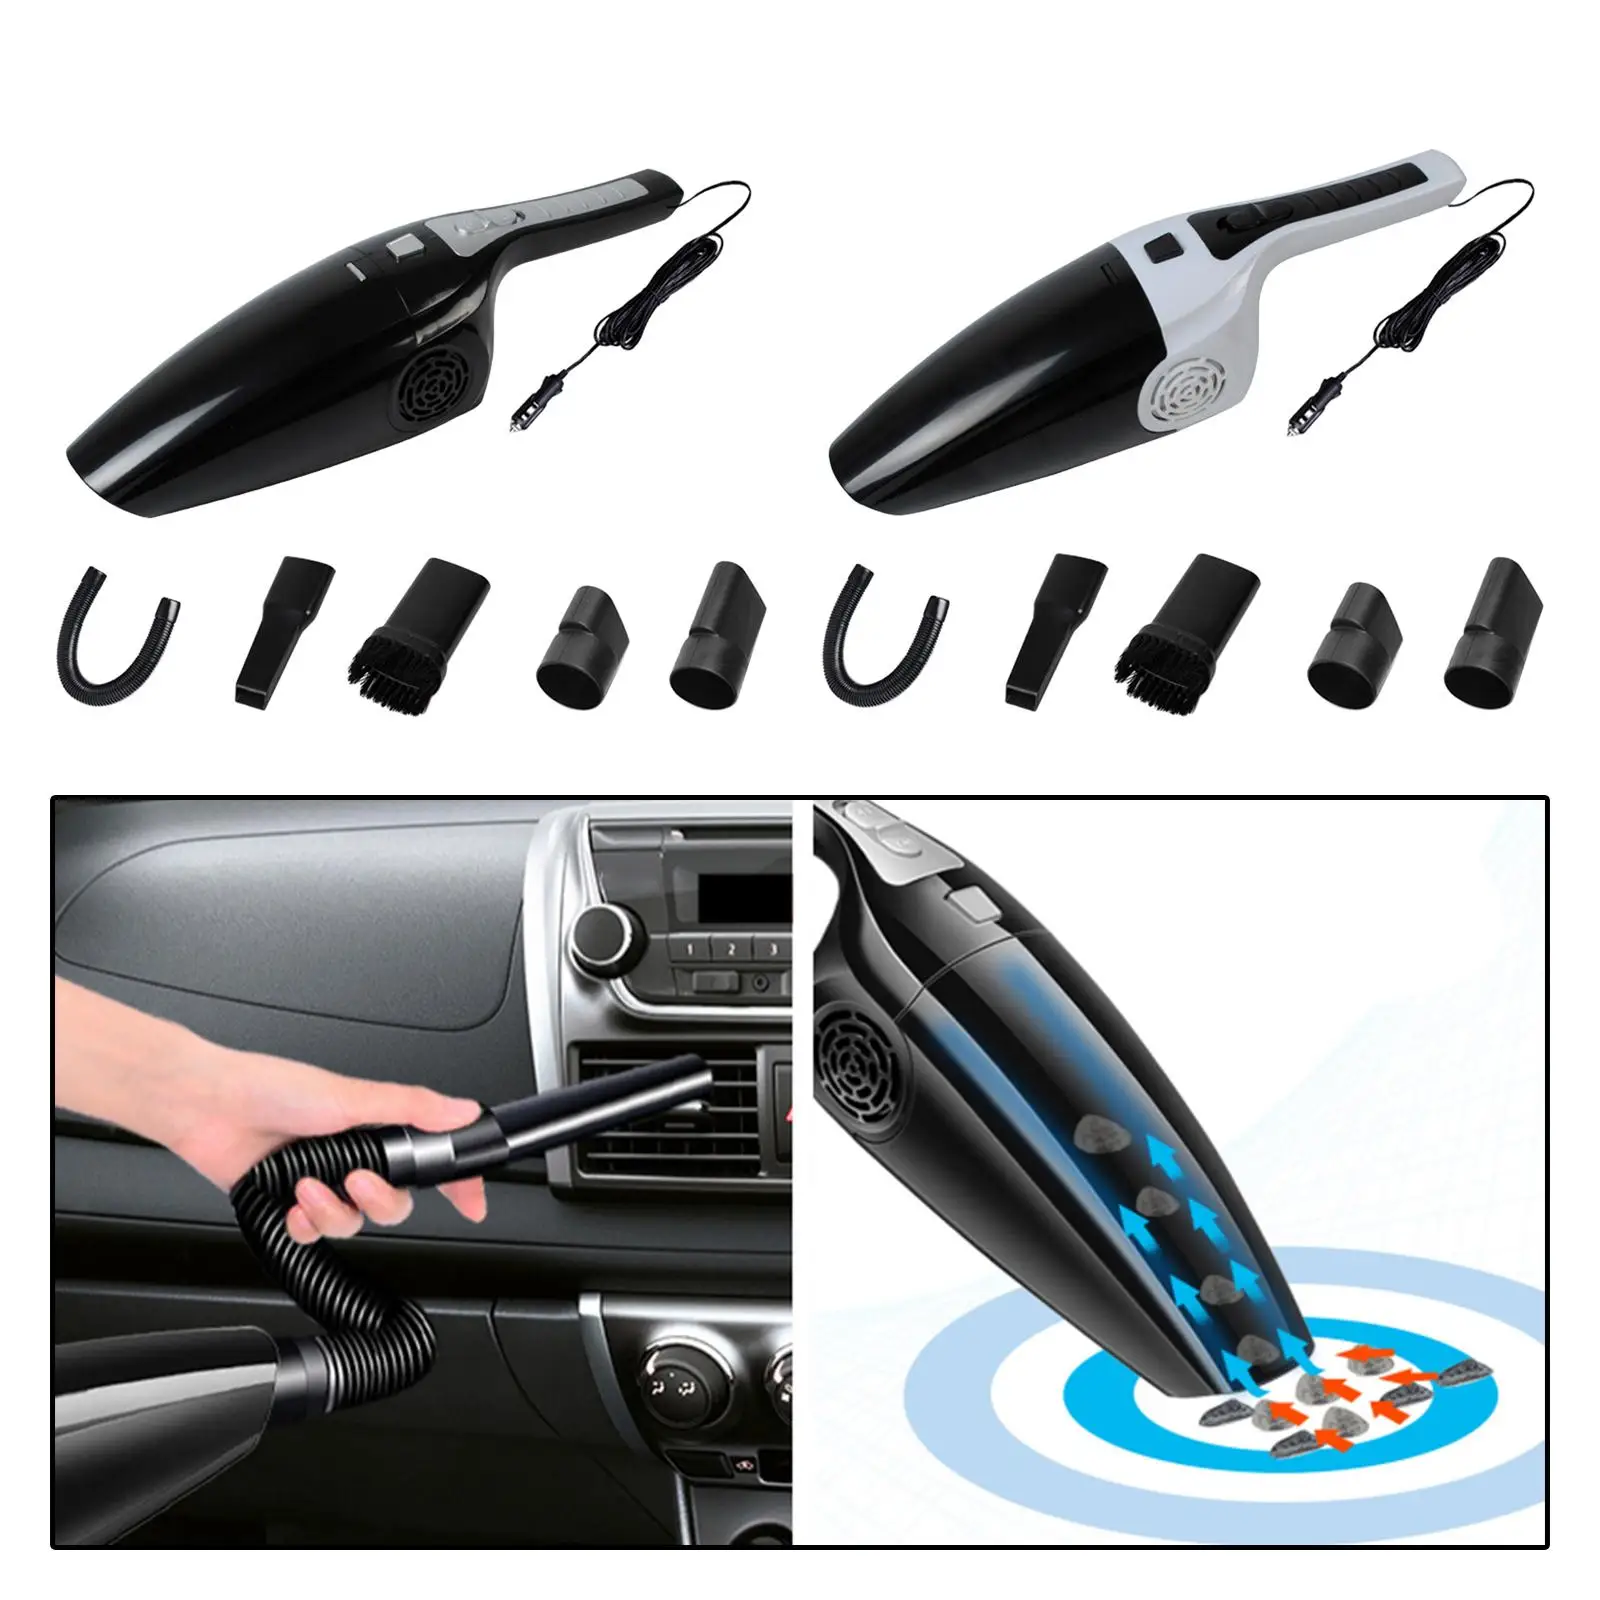 12V Wired Car Vacuum Cleaner with 5 Attachments Corded Strong Suction Mini